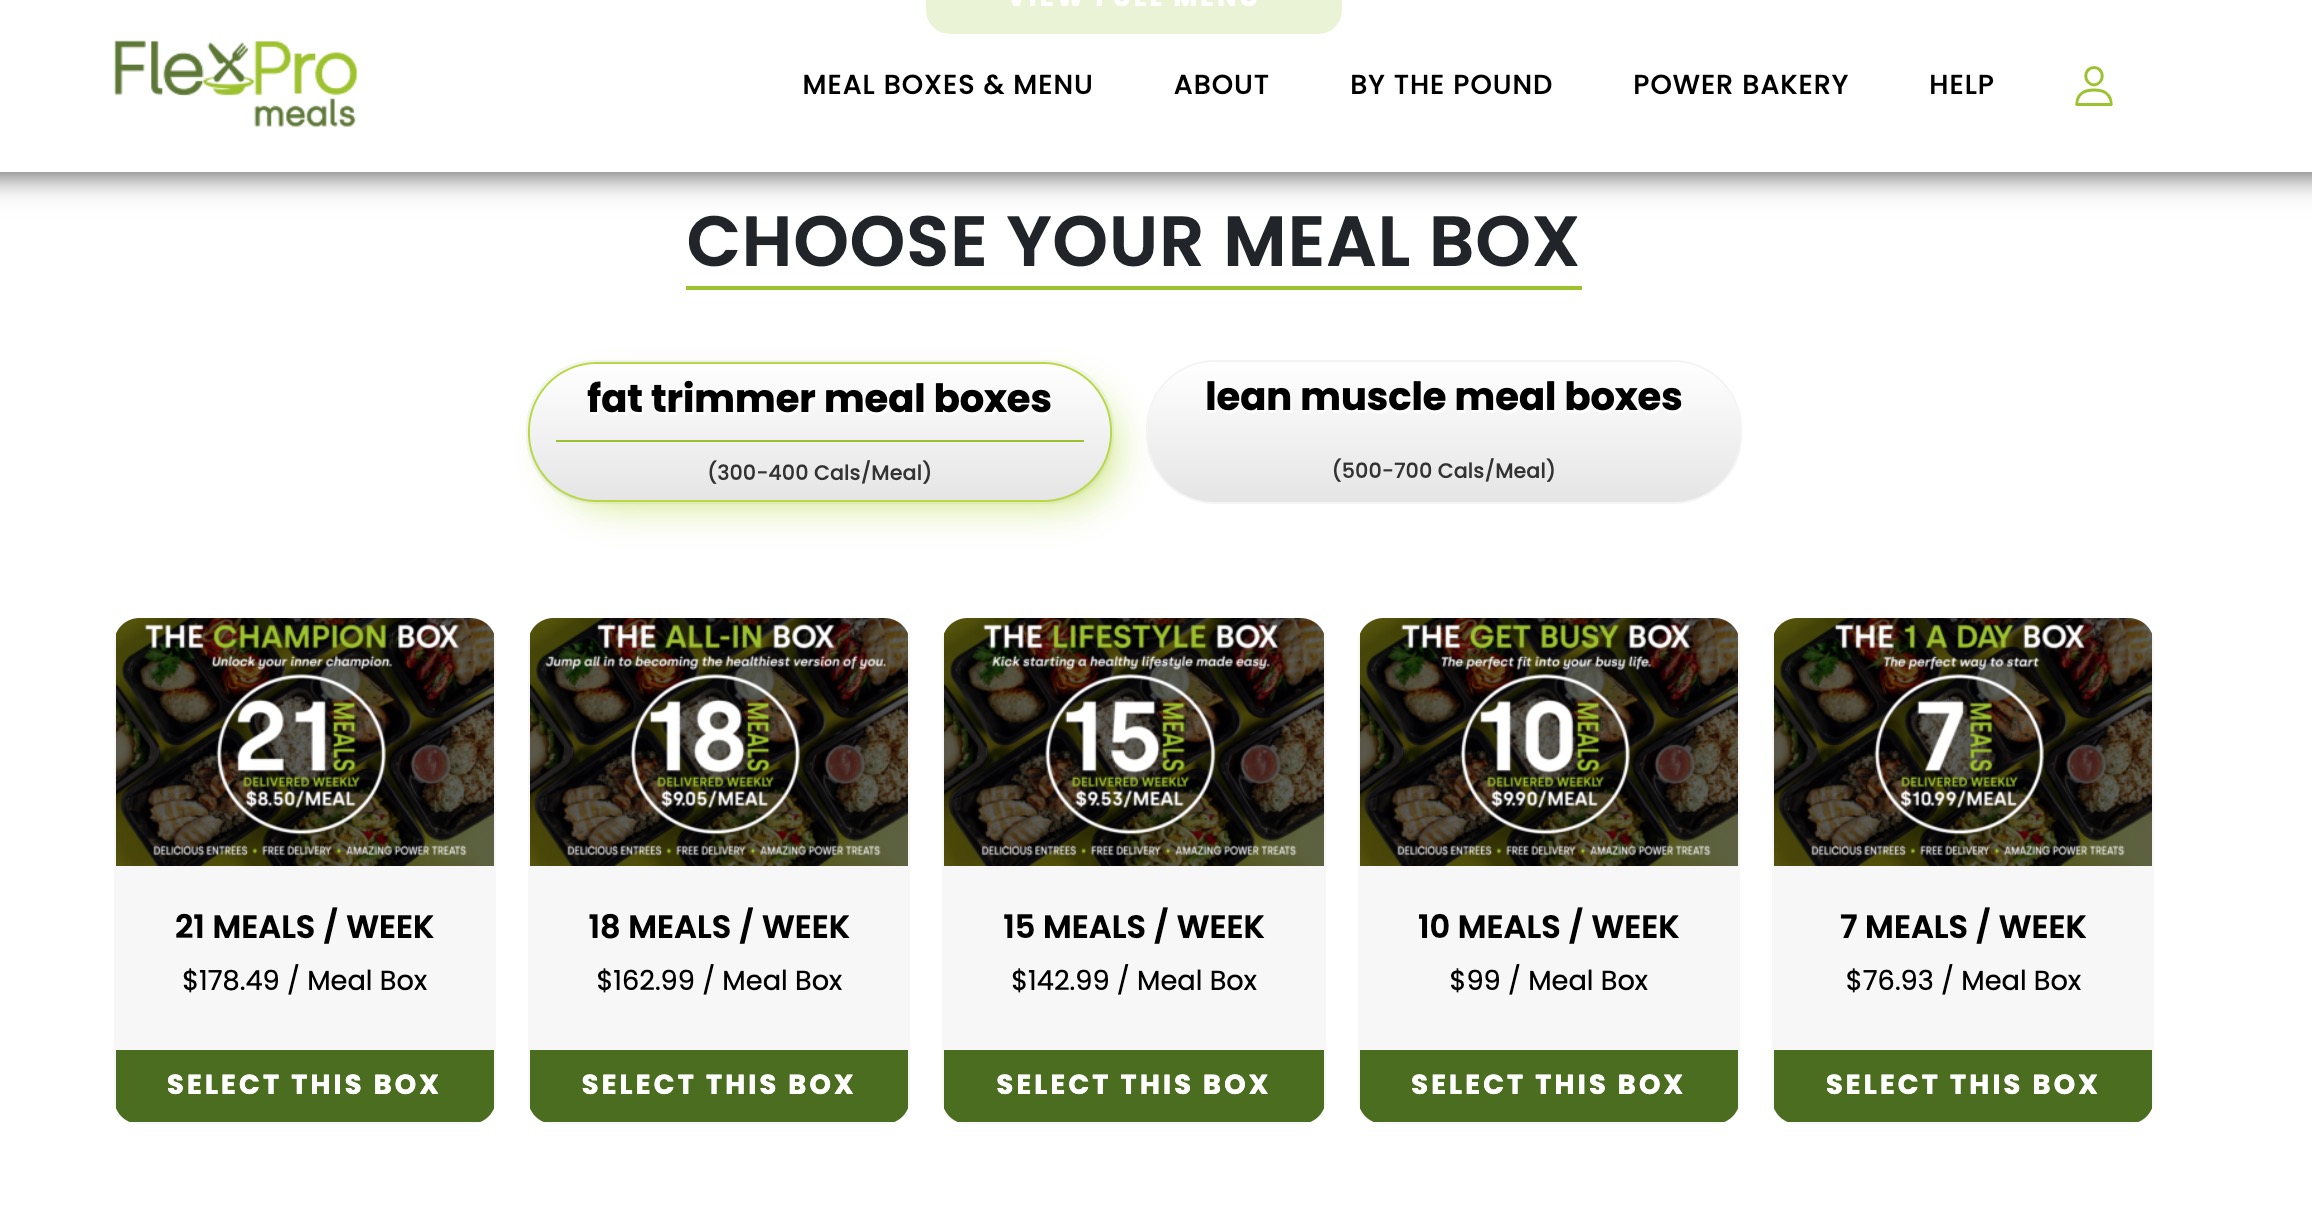 flexpro meals meal box